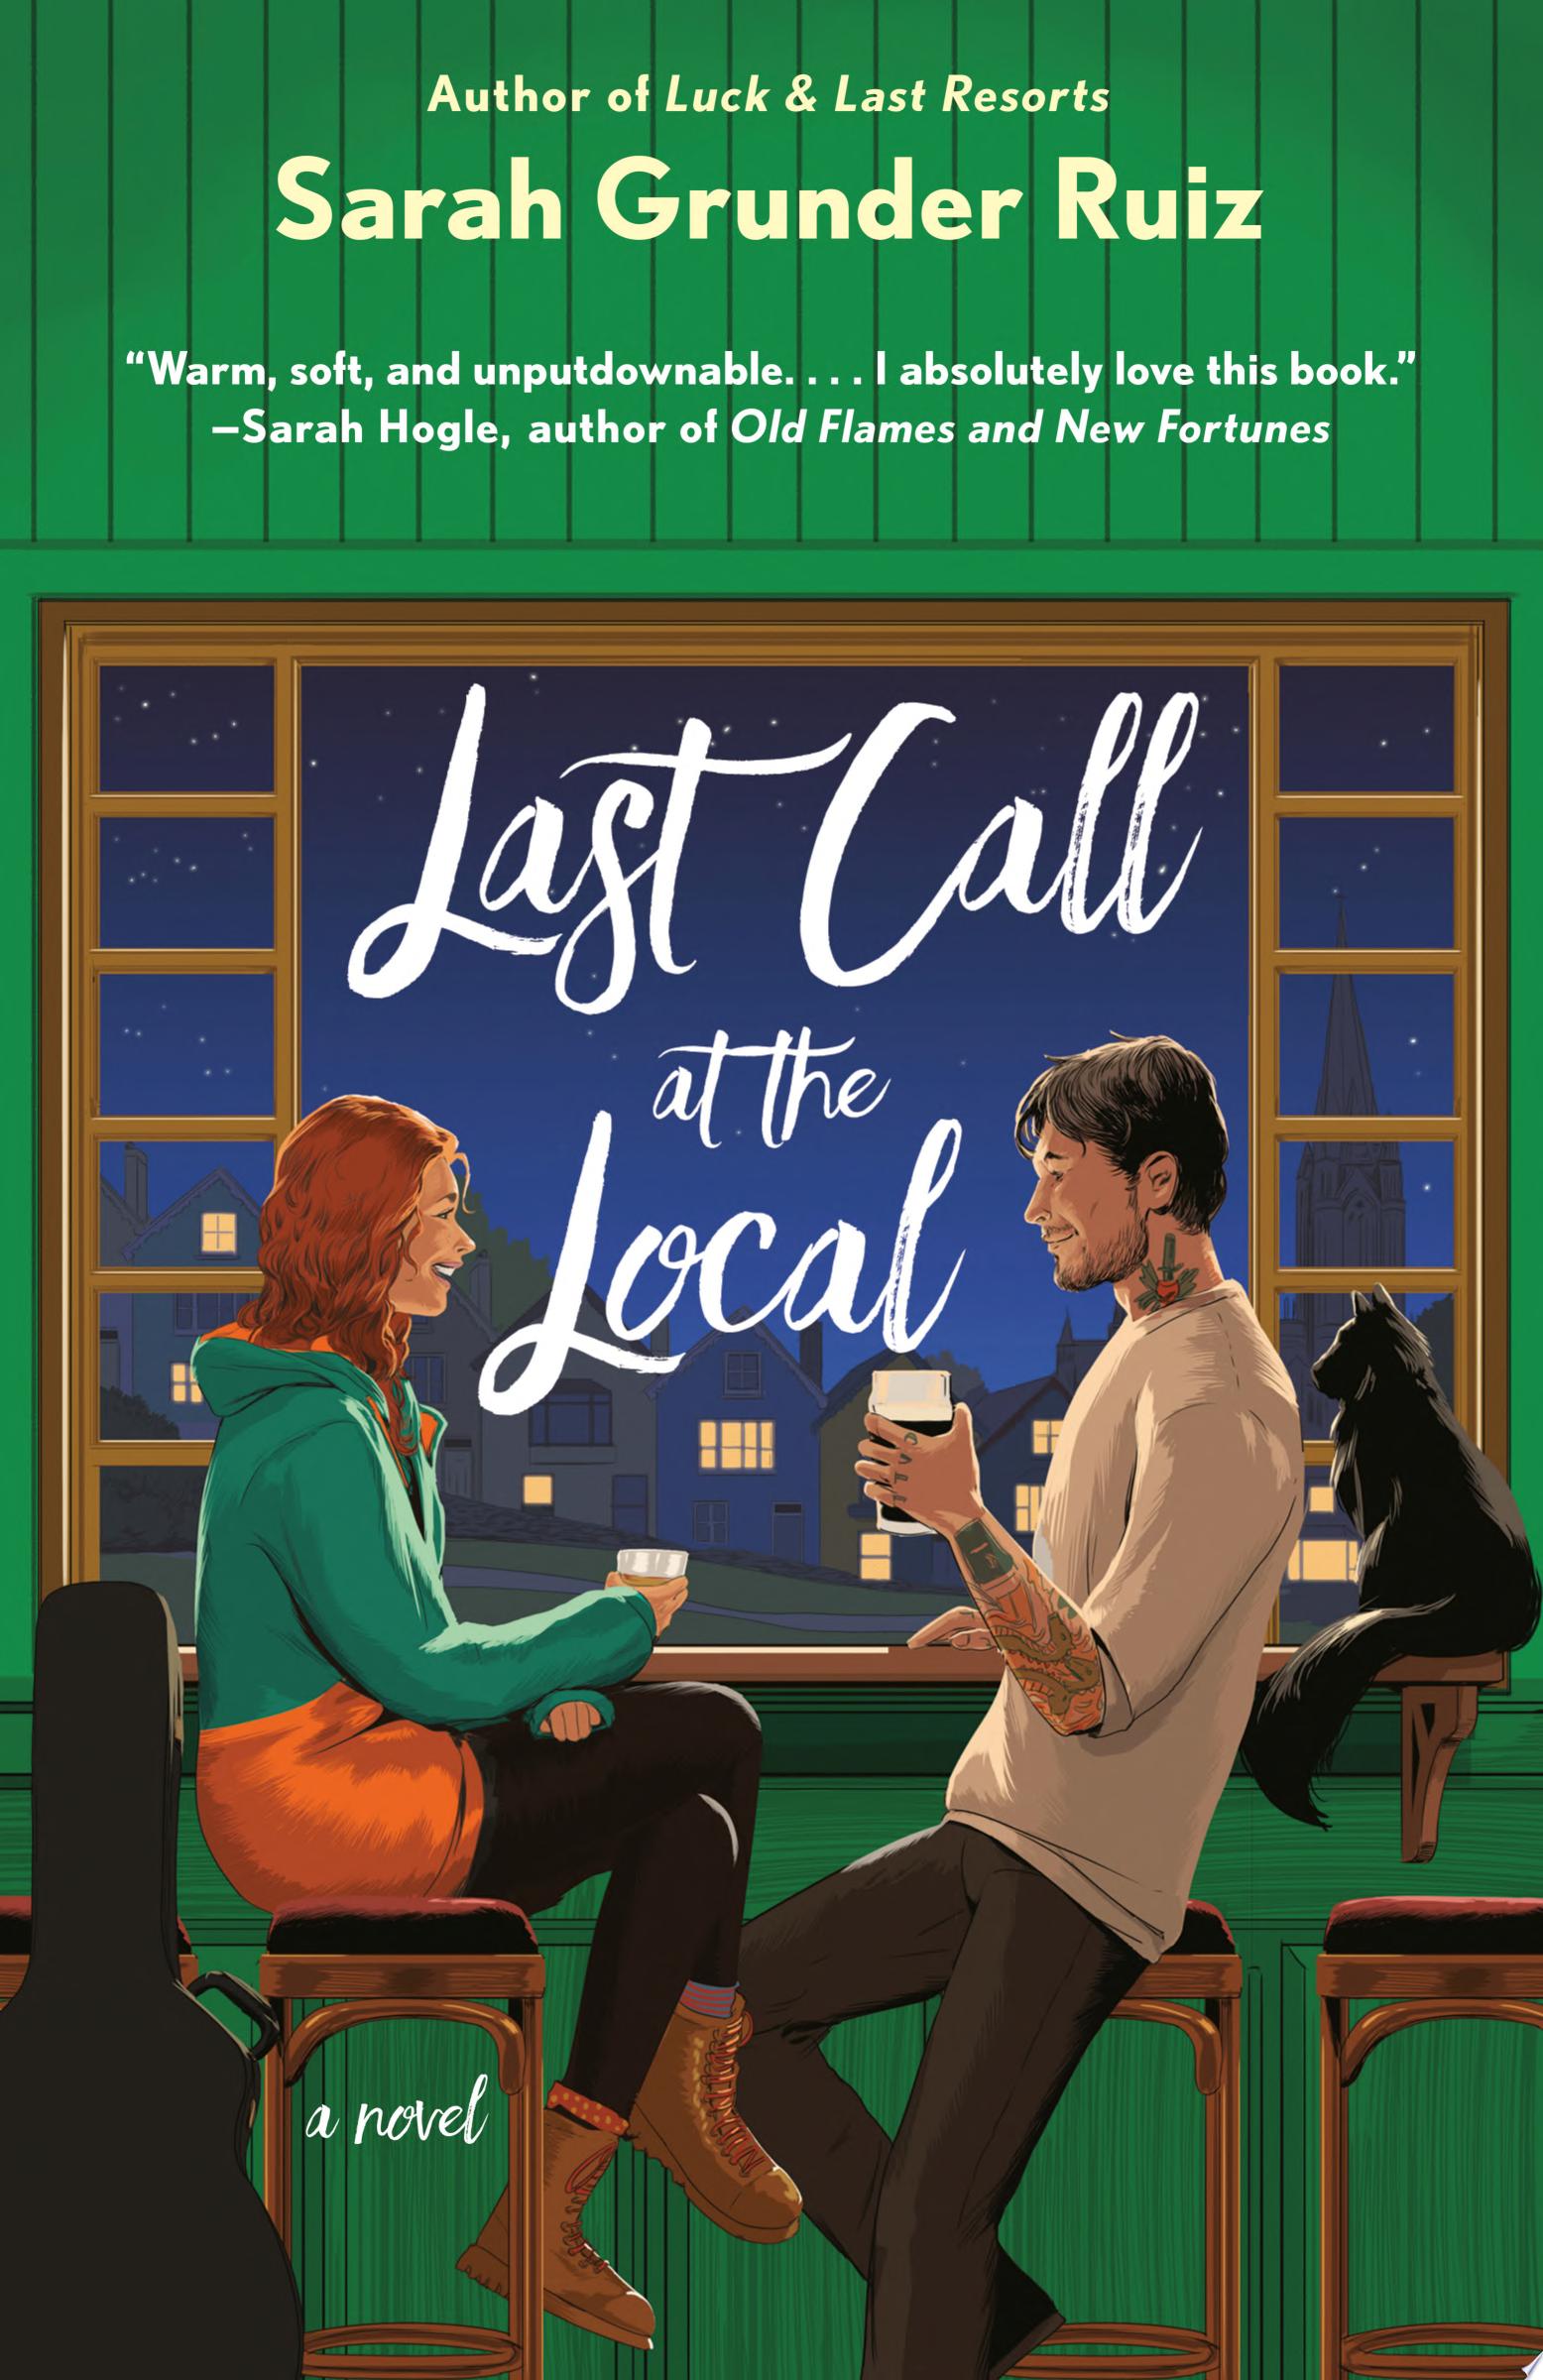 Image for "Last Call at the Local"